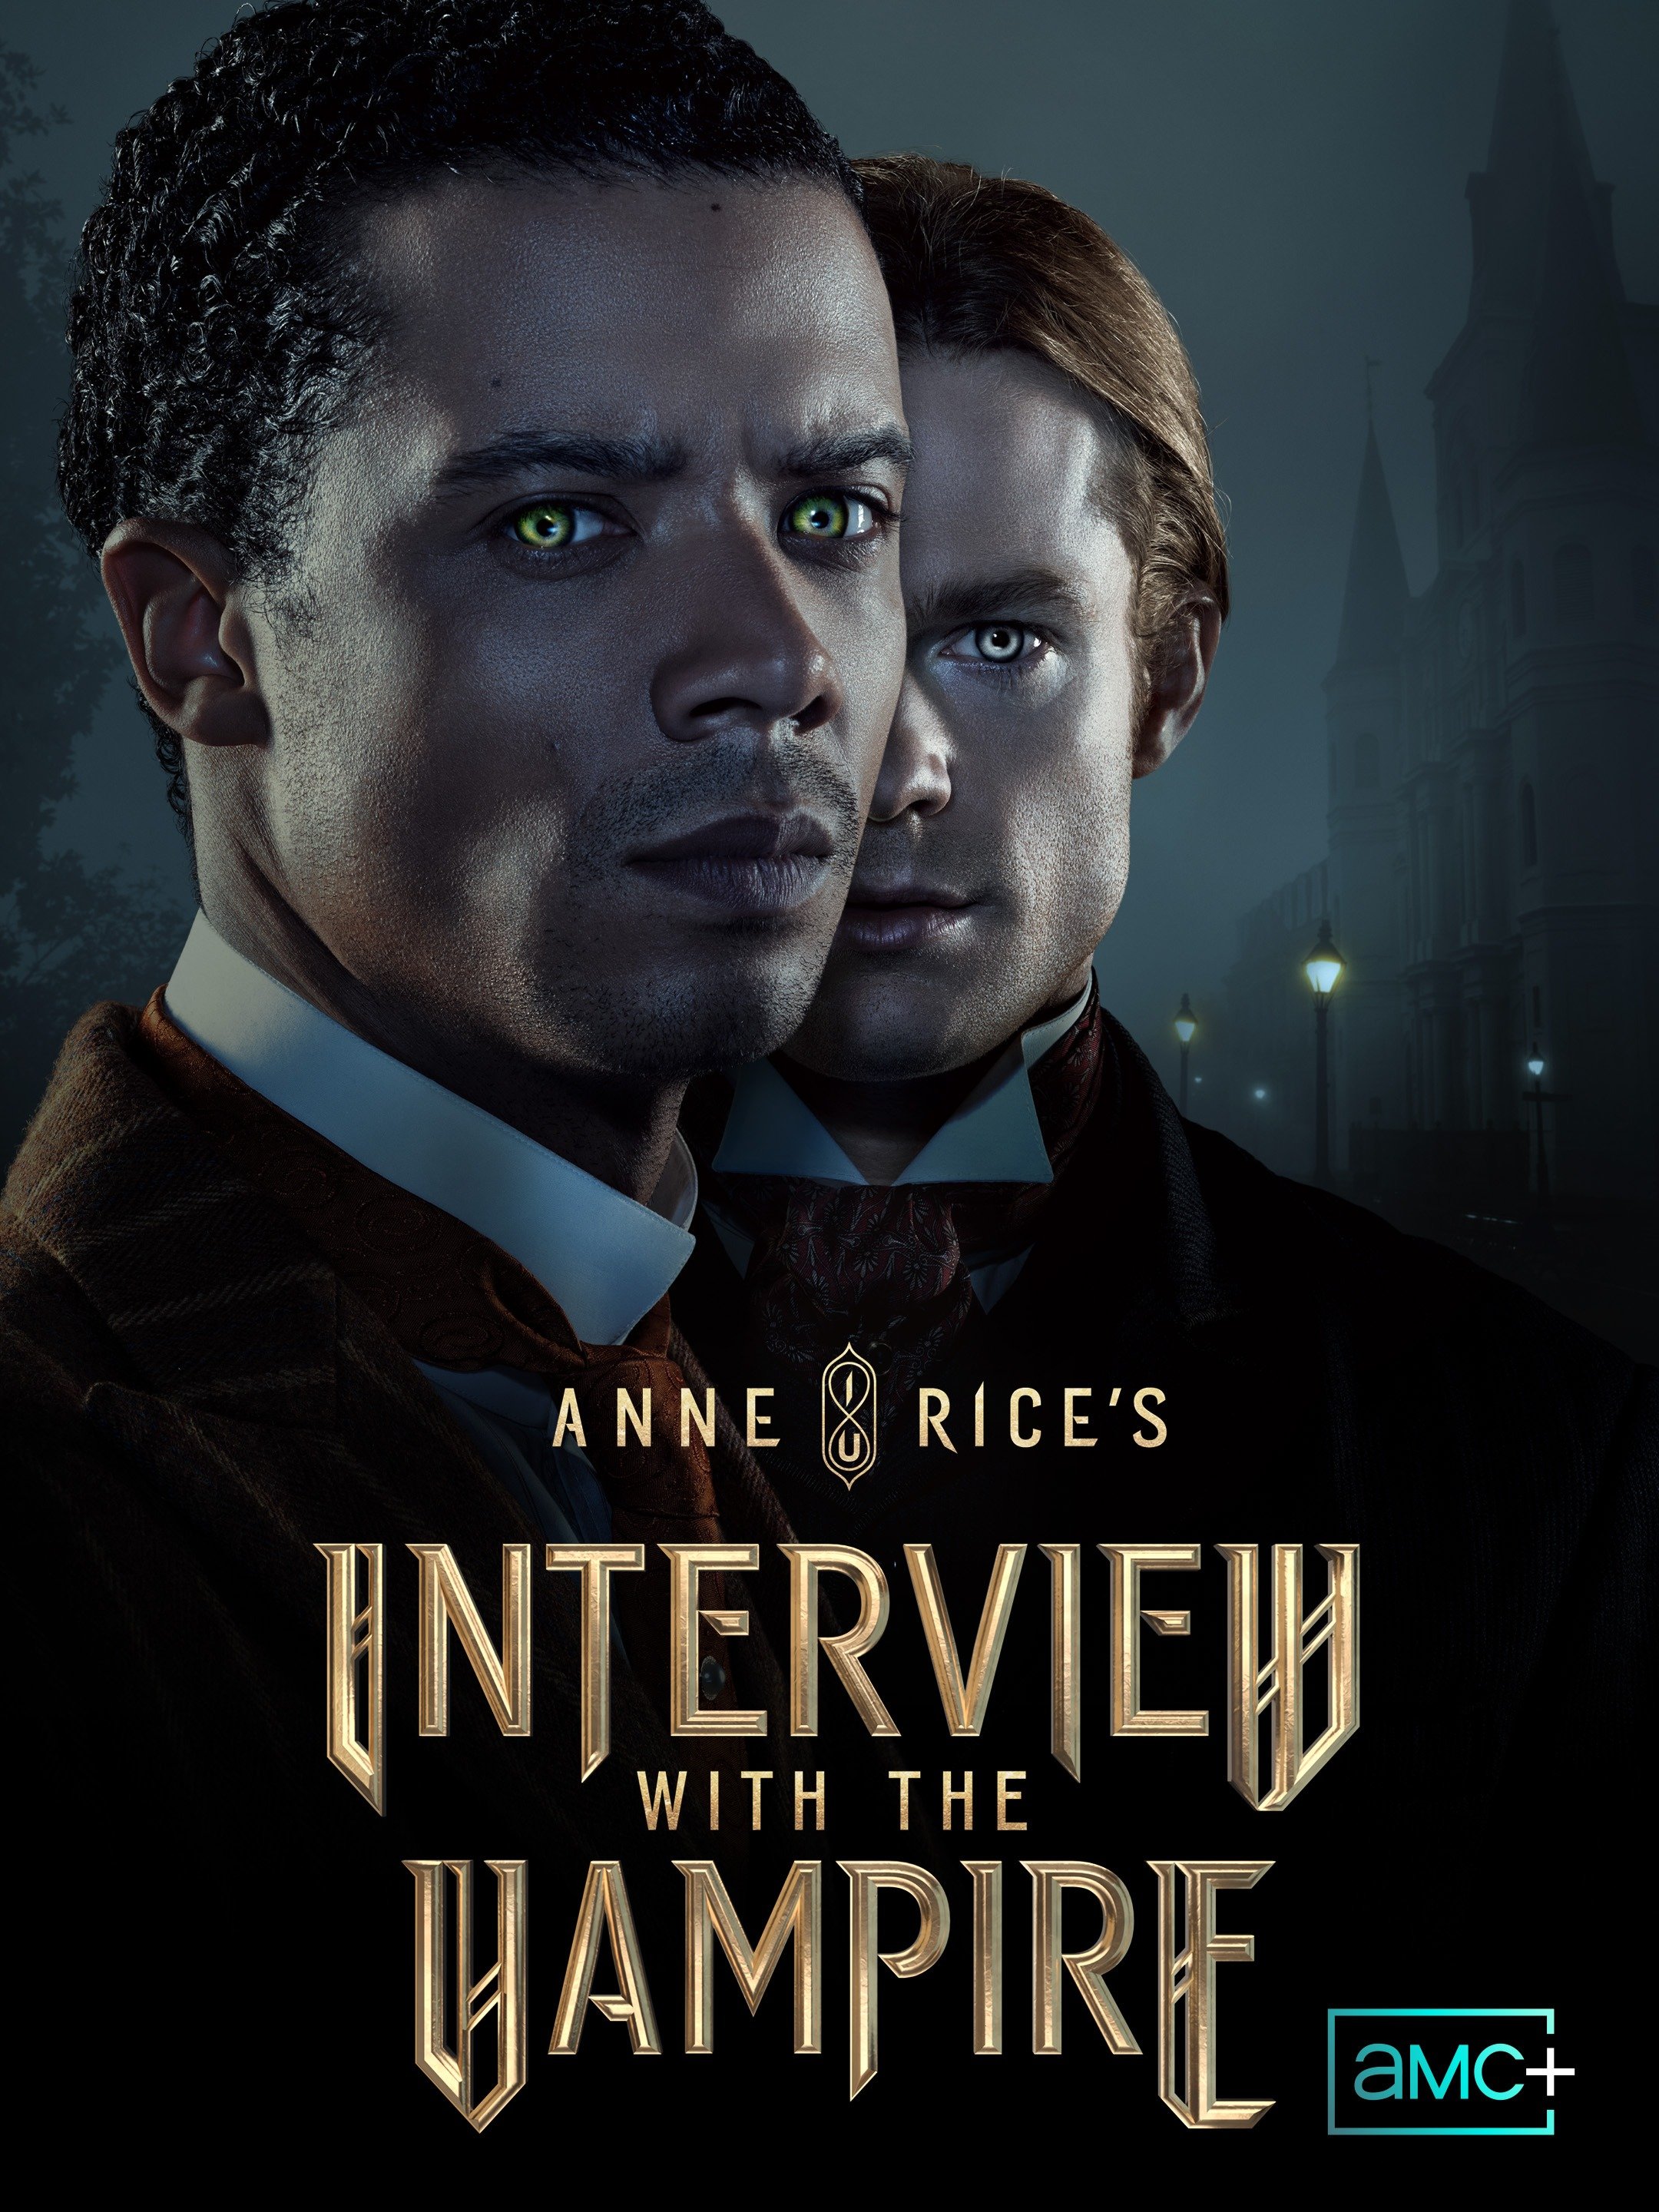 Interview With The Vampire Full Movie